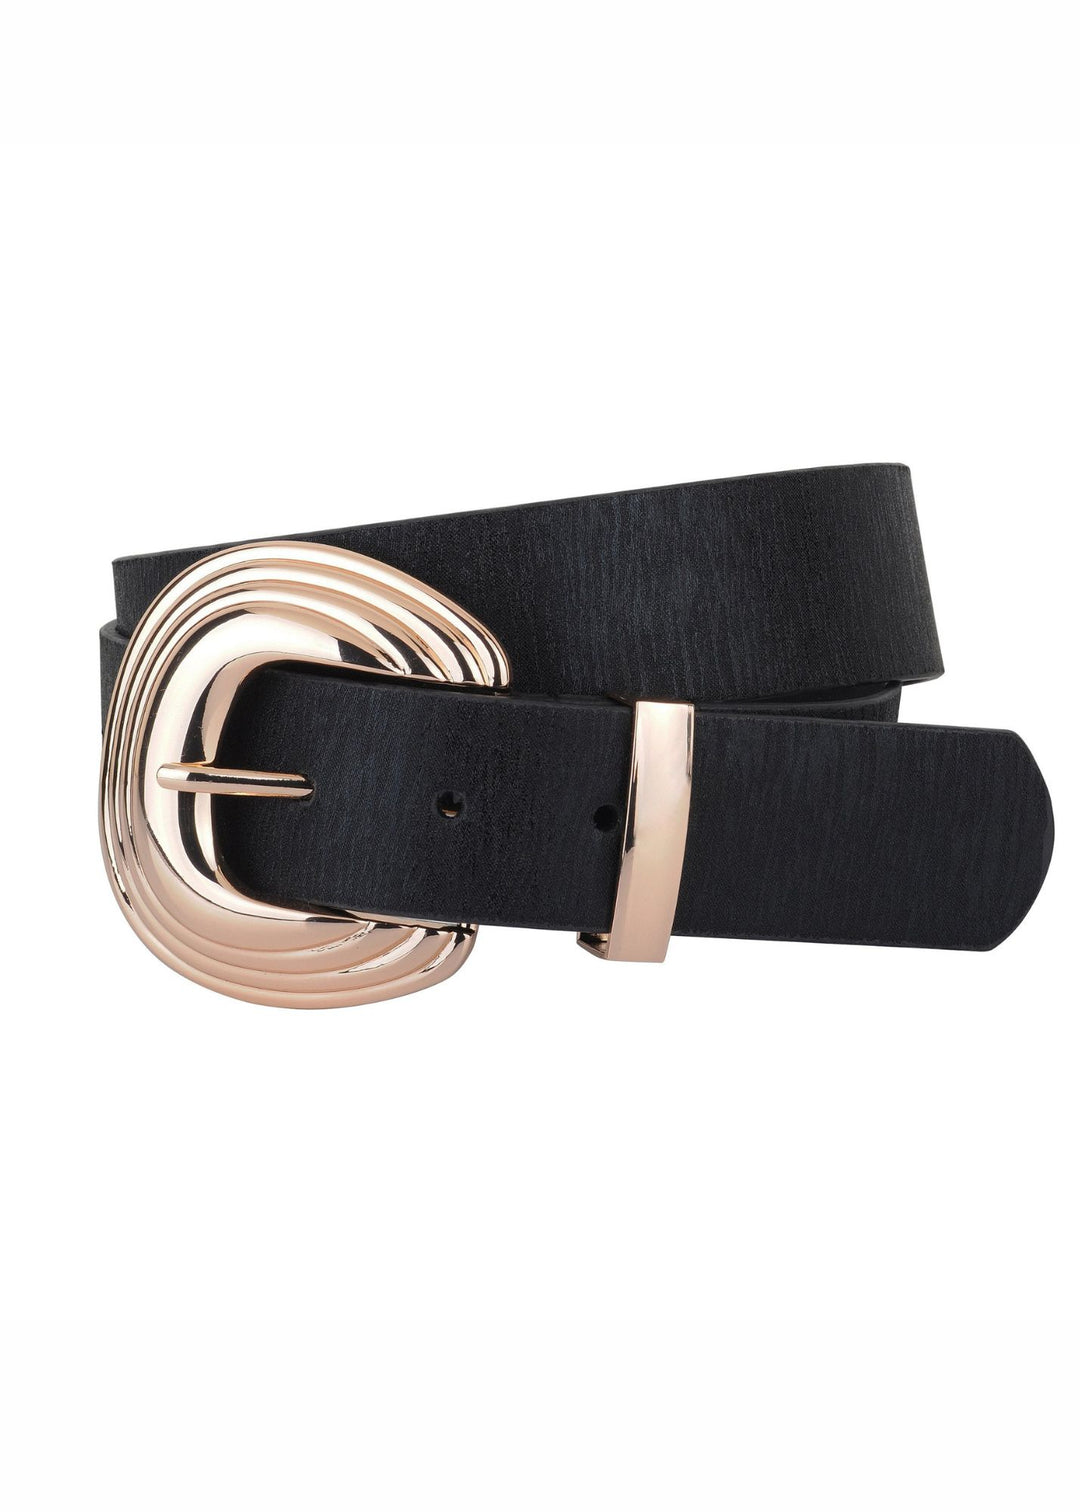 Most Wanted Gold Buckle Belt (Black)